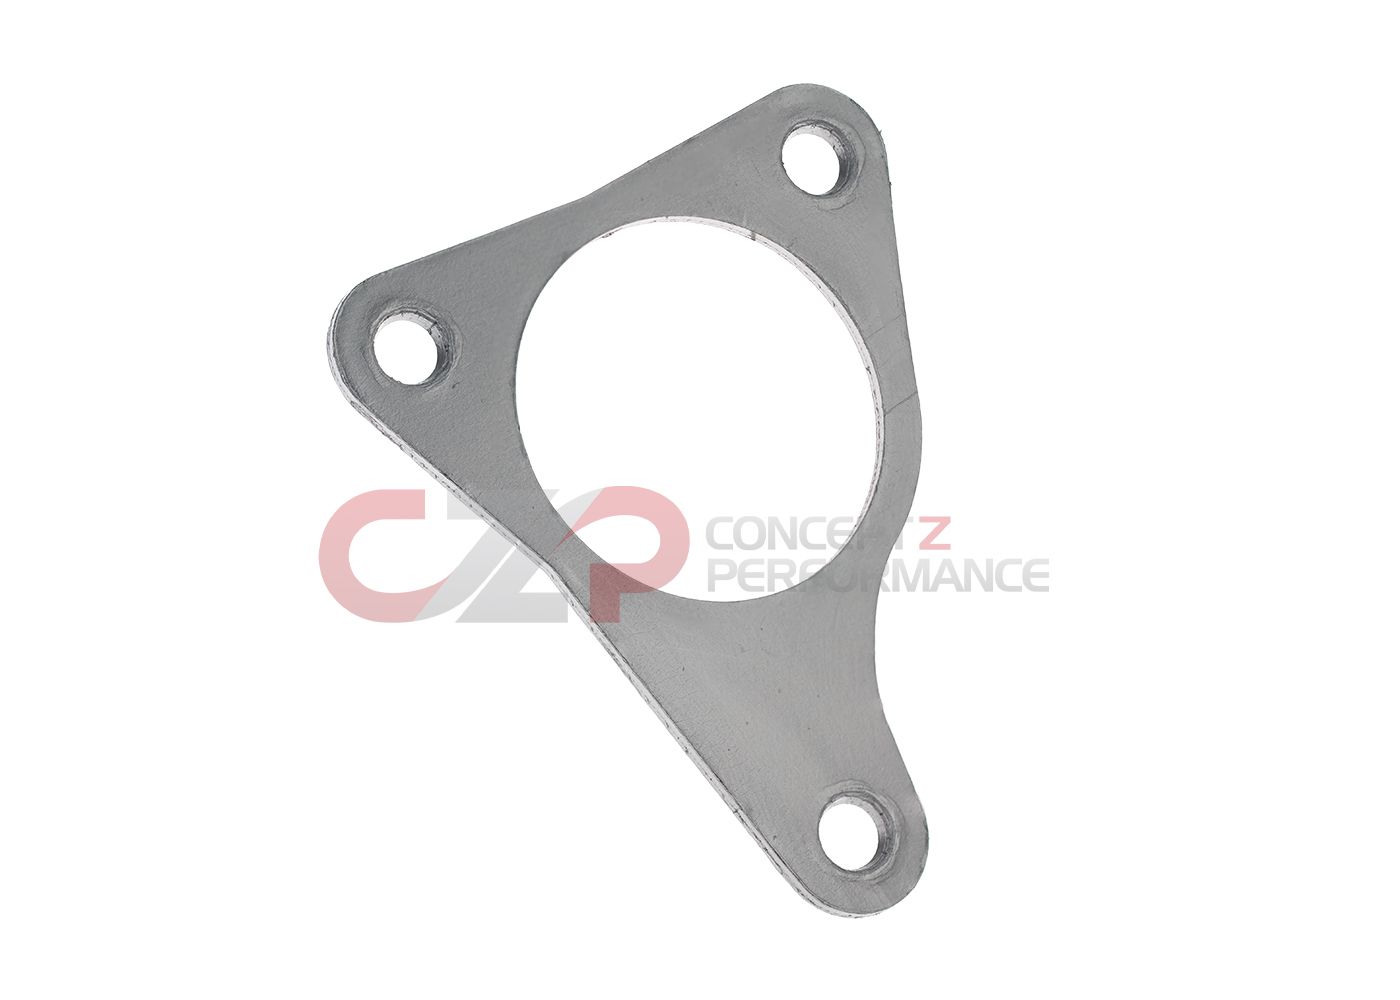 CZP XT eXtra Thick Exhaust Gasket, RH - Pre-Cat / Downpipe to Catalytic Converter / Test Pipe - Infiniti Q50 Q60 3.0T VR30DDTT